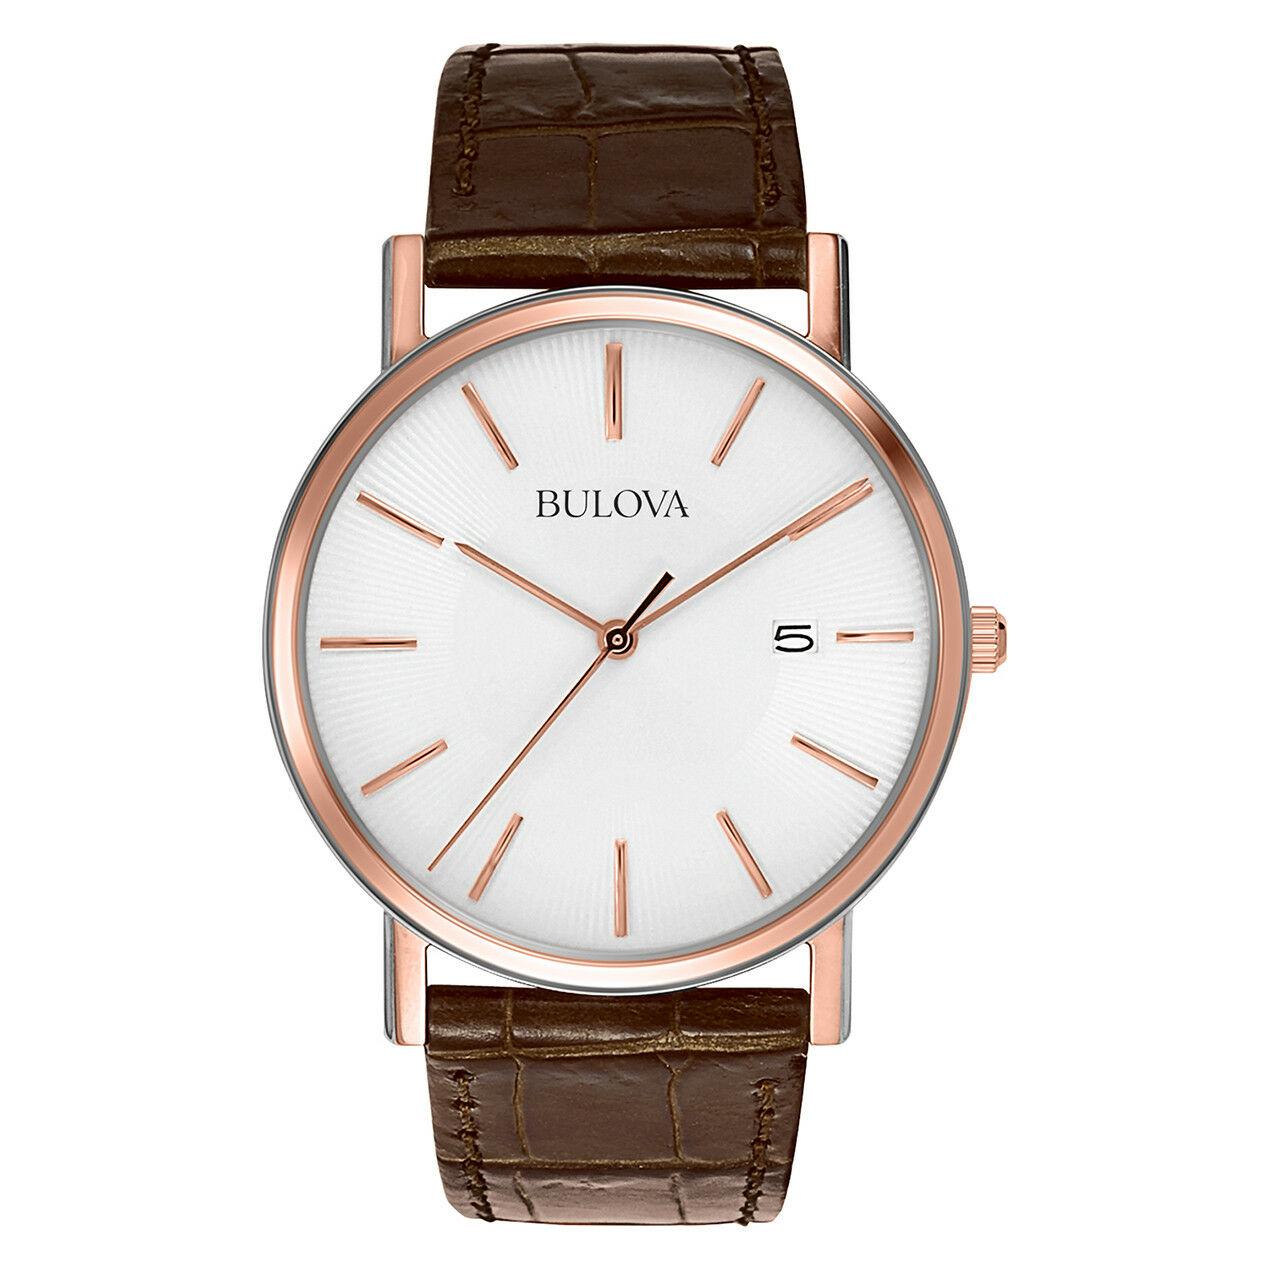 New With Defects Bulova Classic 37mm Rose Gold-Tone Steel White Dial Quartz Men's Watch 98H51. Timepiece Has Light Scuffs or Glue Marks on the Band and Tiny Scratches on the Bezel. This Beautiful Timepiece Features: Stainless Steel Case with a Brown